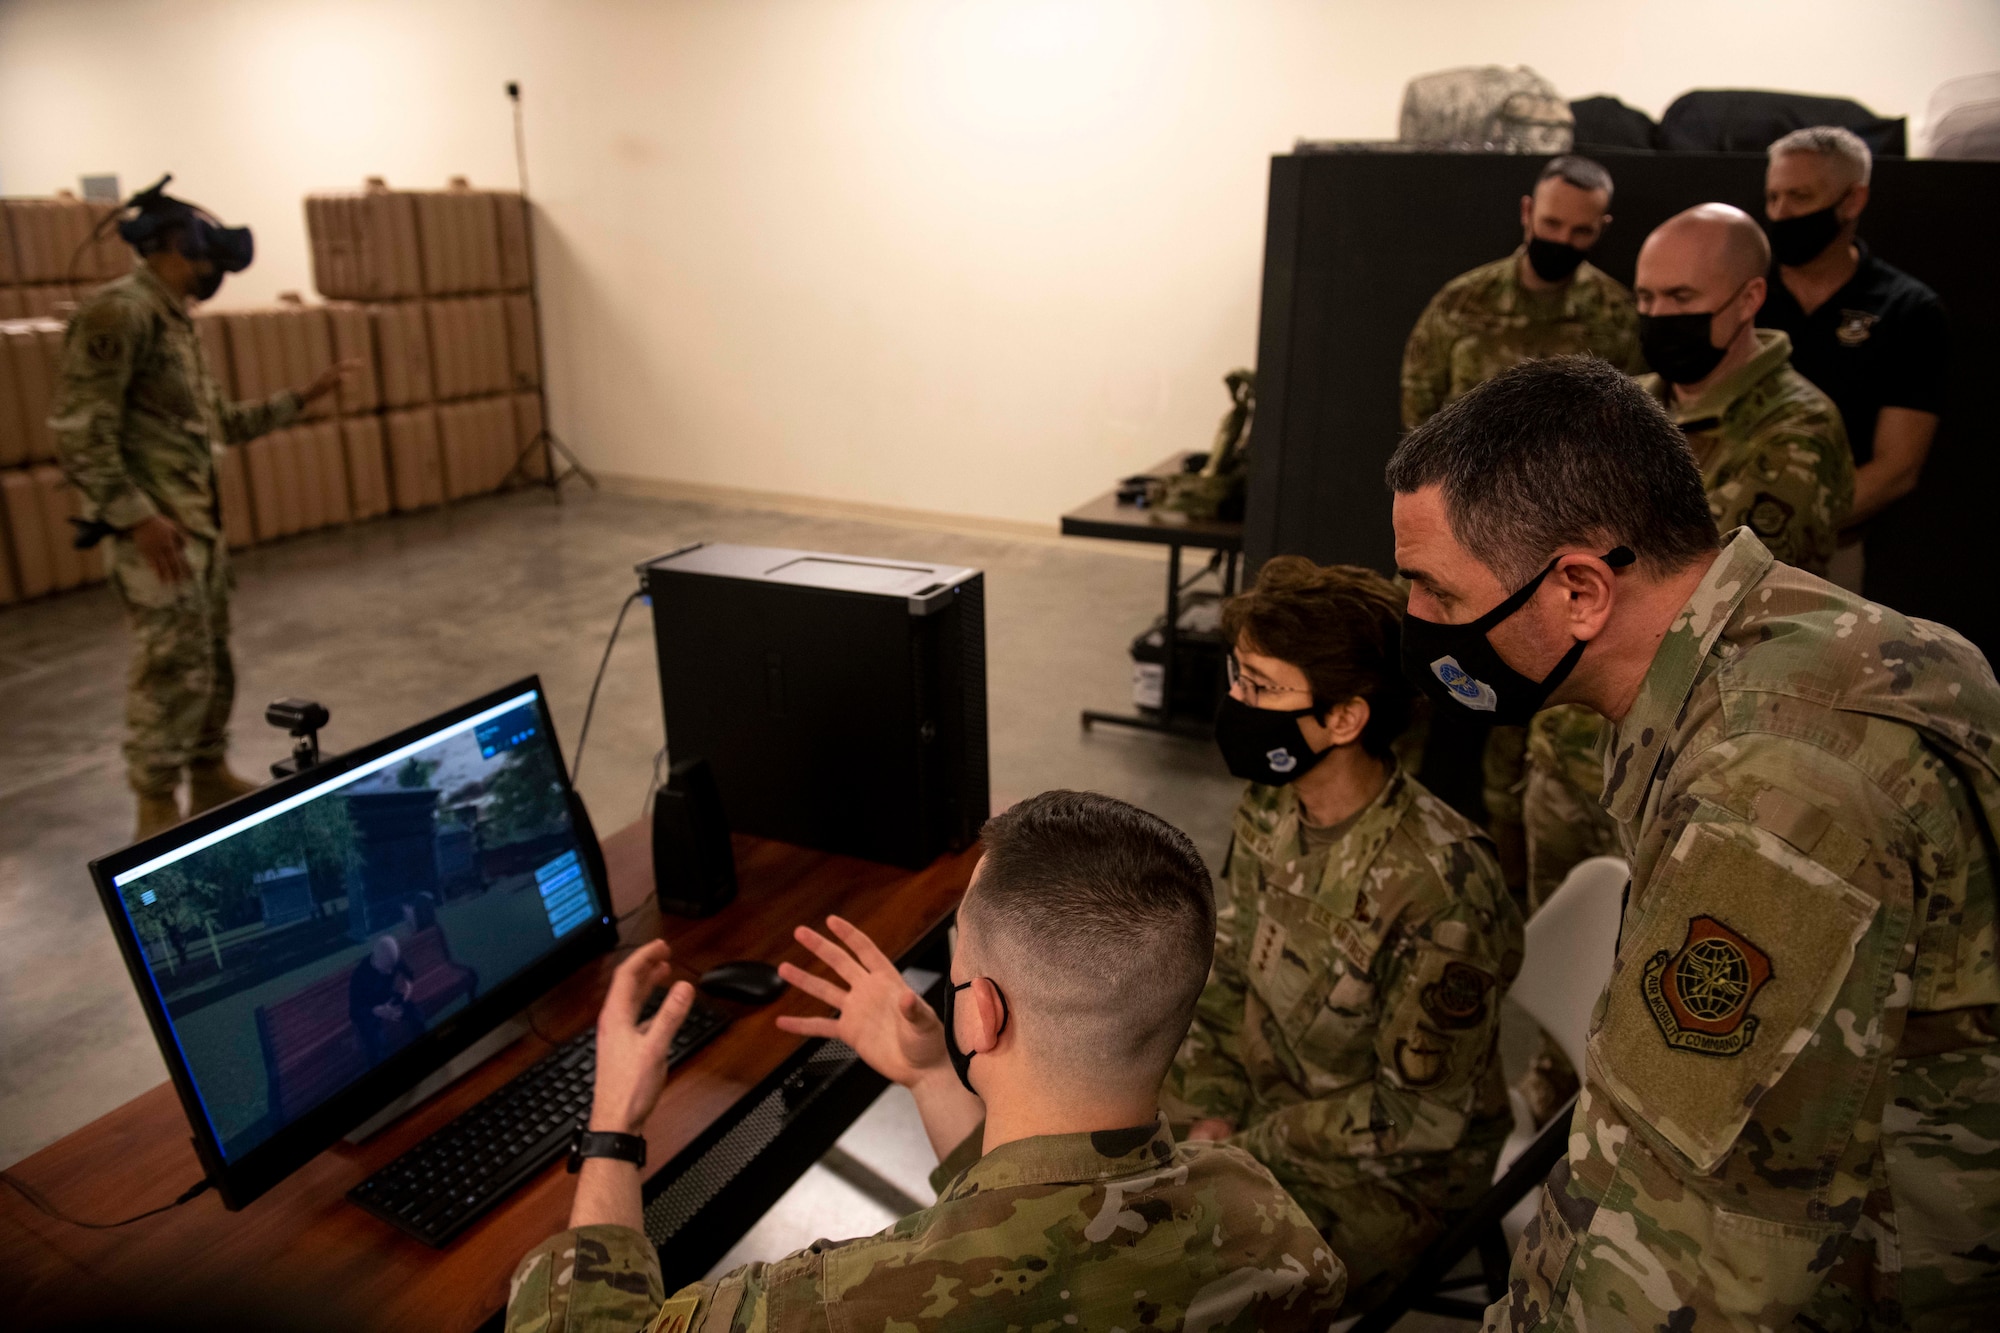 U.S. Air Force Gen. Jacqueline Van Ovost, Air Mobility Command commander, and Chief Master Sgt. Brian Kruzelnick, AMC command chief, watch a virtual use of force training demonstration at Fairchild Air Force Base, Washington, March 3, 2021. The AMC command team participated in a hands-on, shoot and move demonstration with the 92nd SFS and spoke with Fairchild defenders about their contribution to the AMC mission. (U.S. Air Force photo by Senior Airman Lawrence Sena)